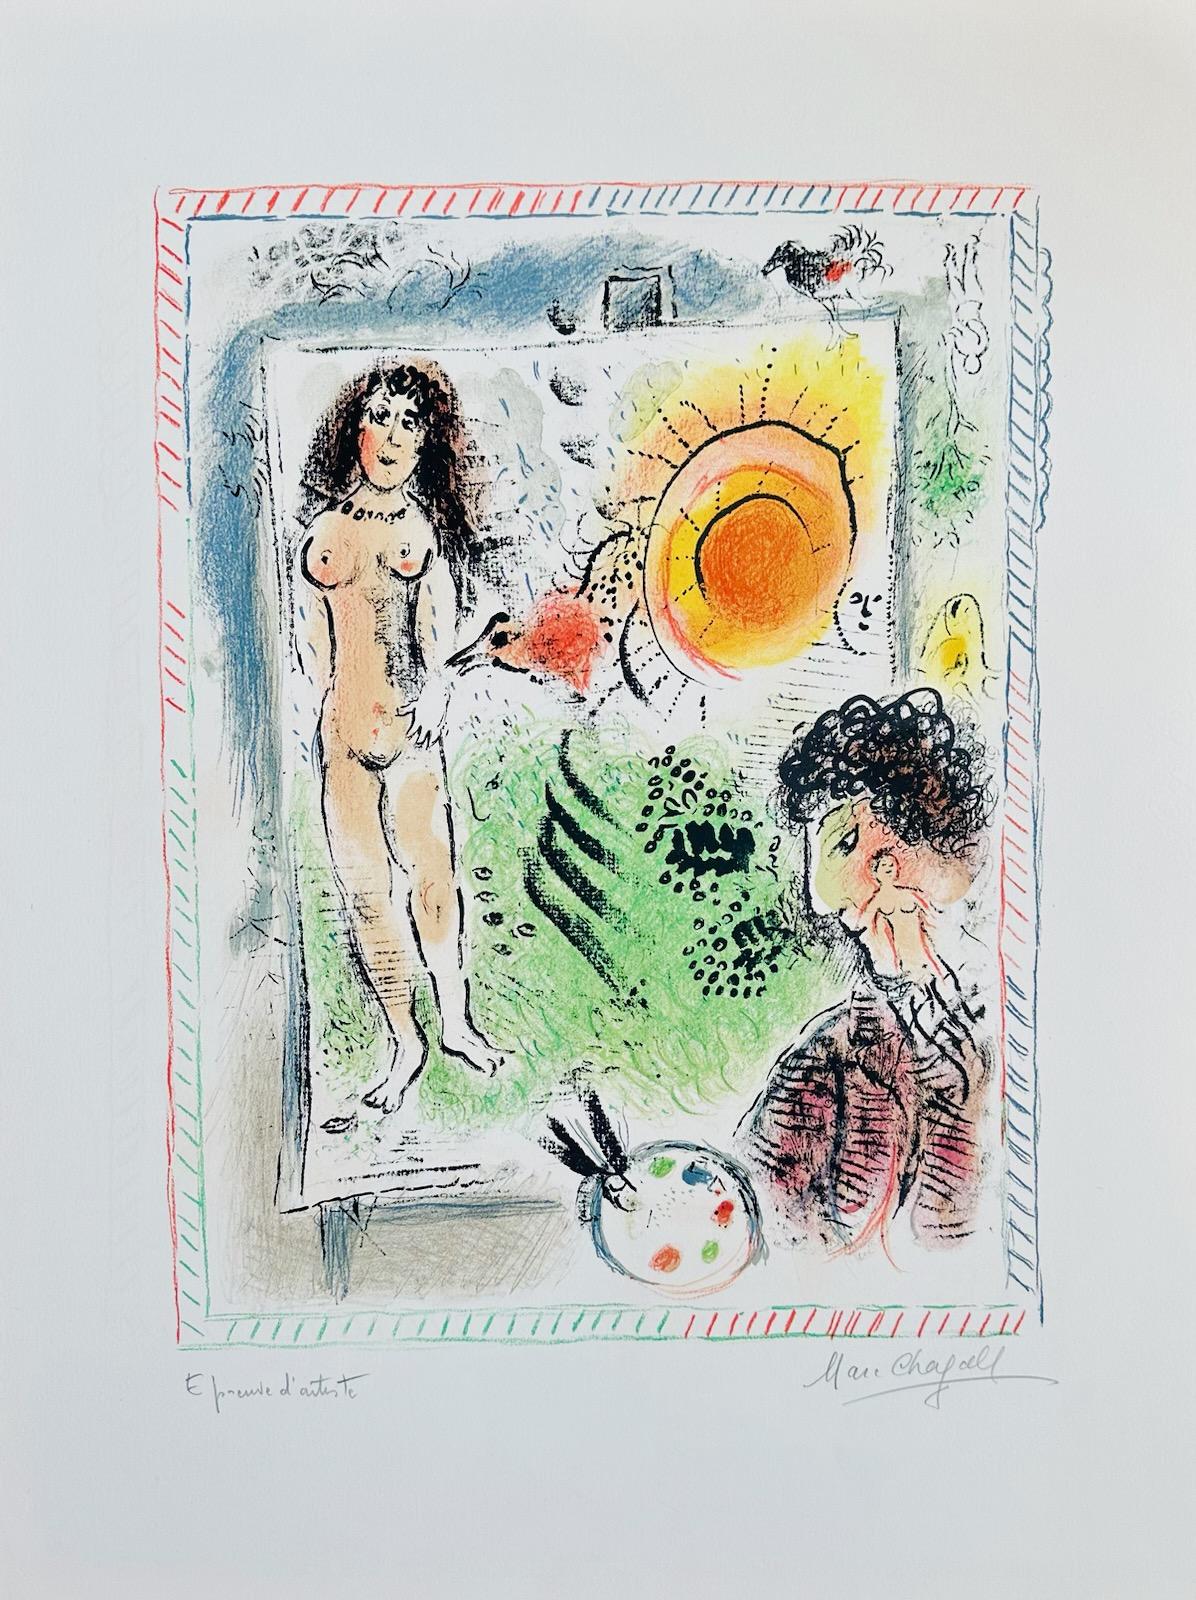 What is Marc Chagall famous for?